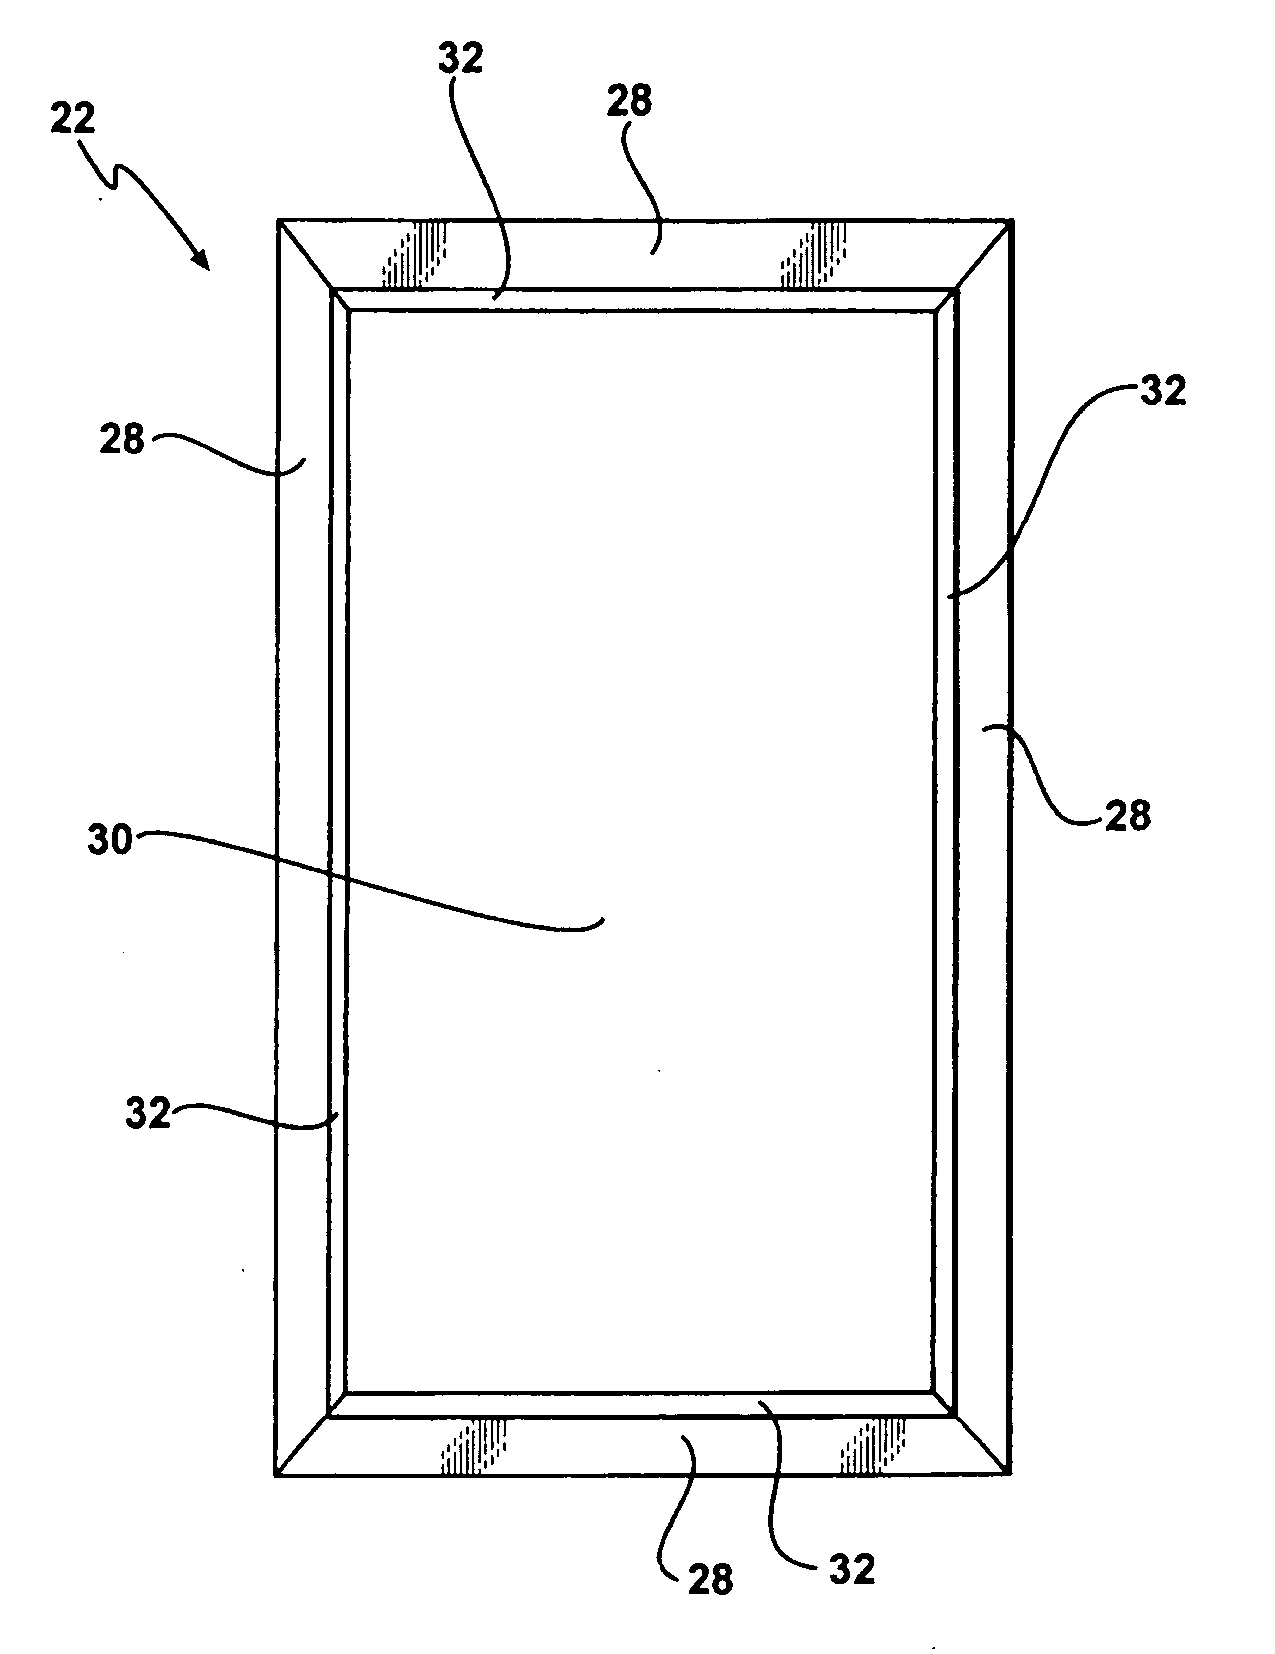 Screen assembly and method of attaching a screen cloth therein using a light curable adhesive